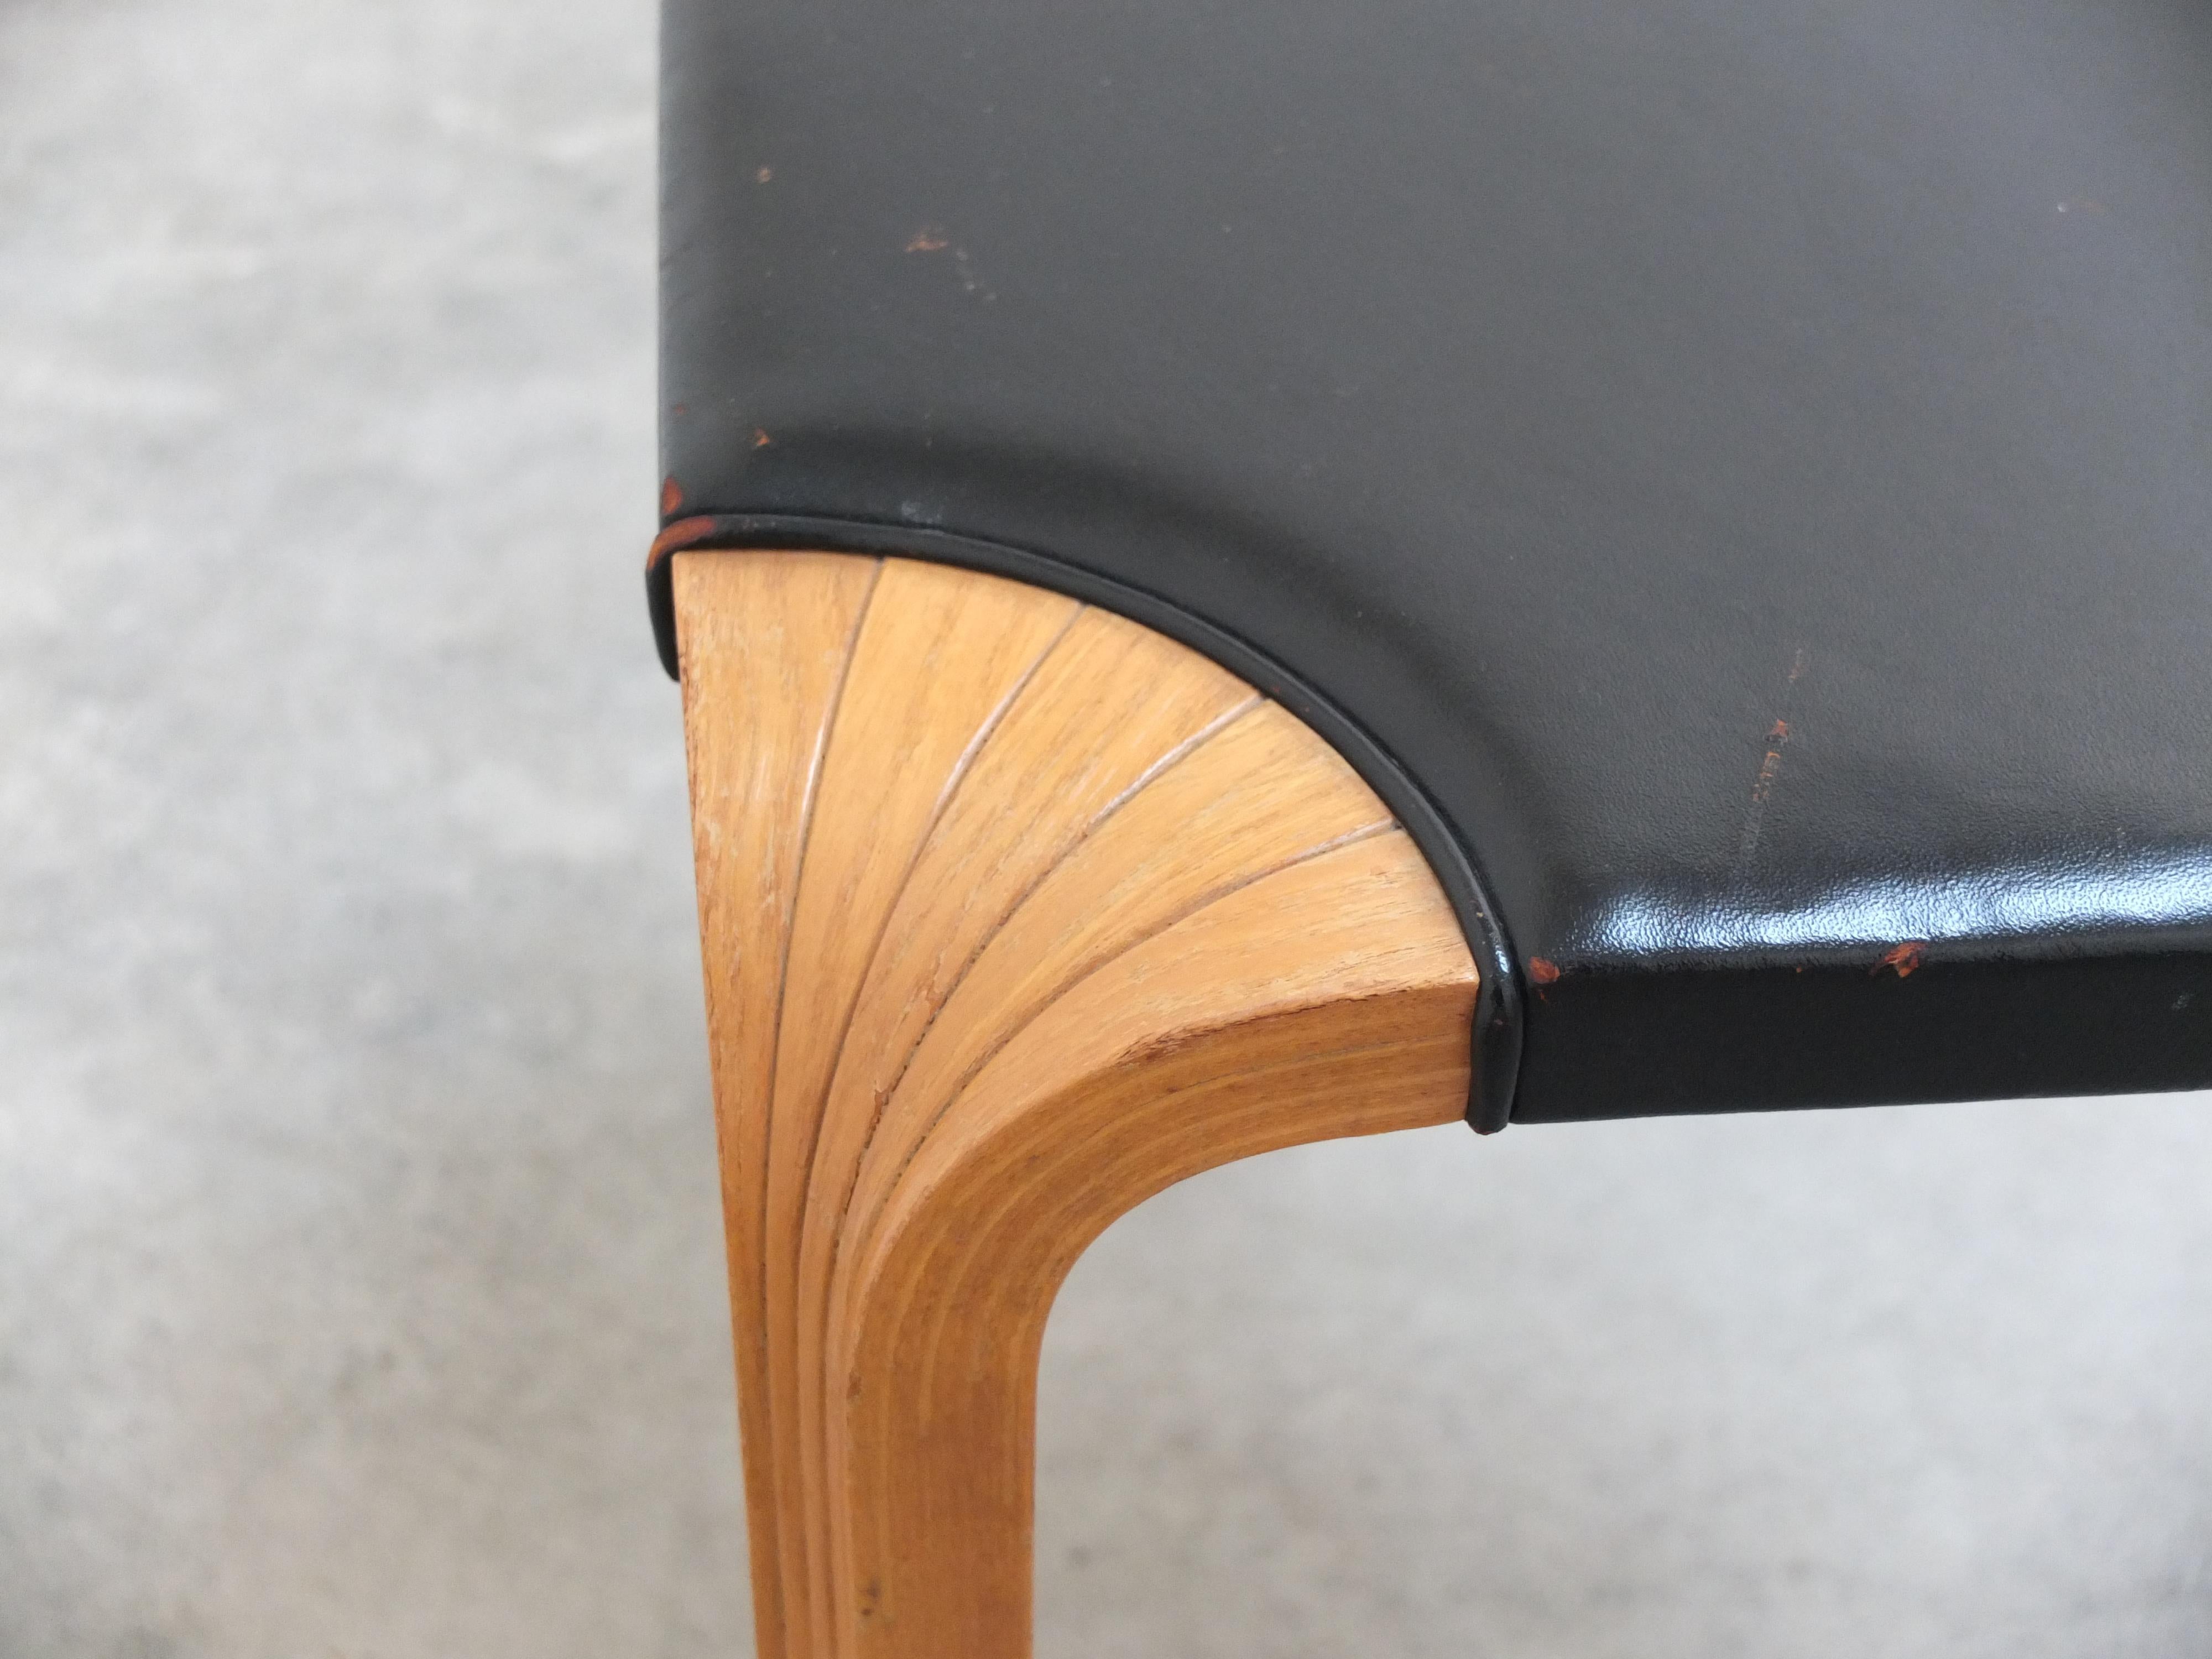 Important Pair of 'X602' Stools by Alvar Aalto for Artek, 1954 For Sale 5